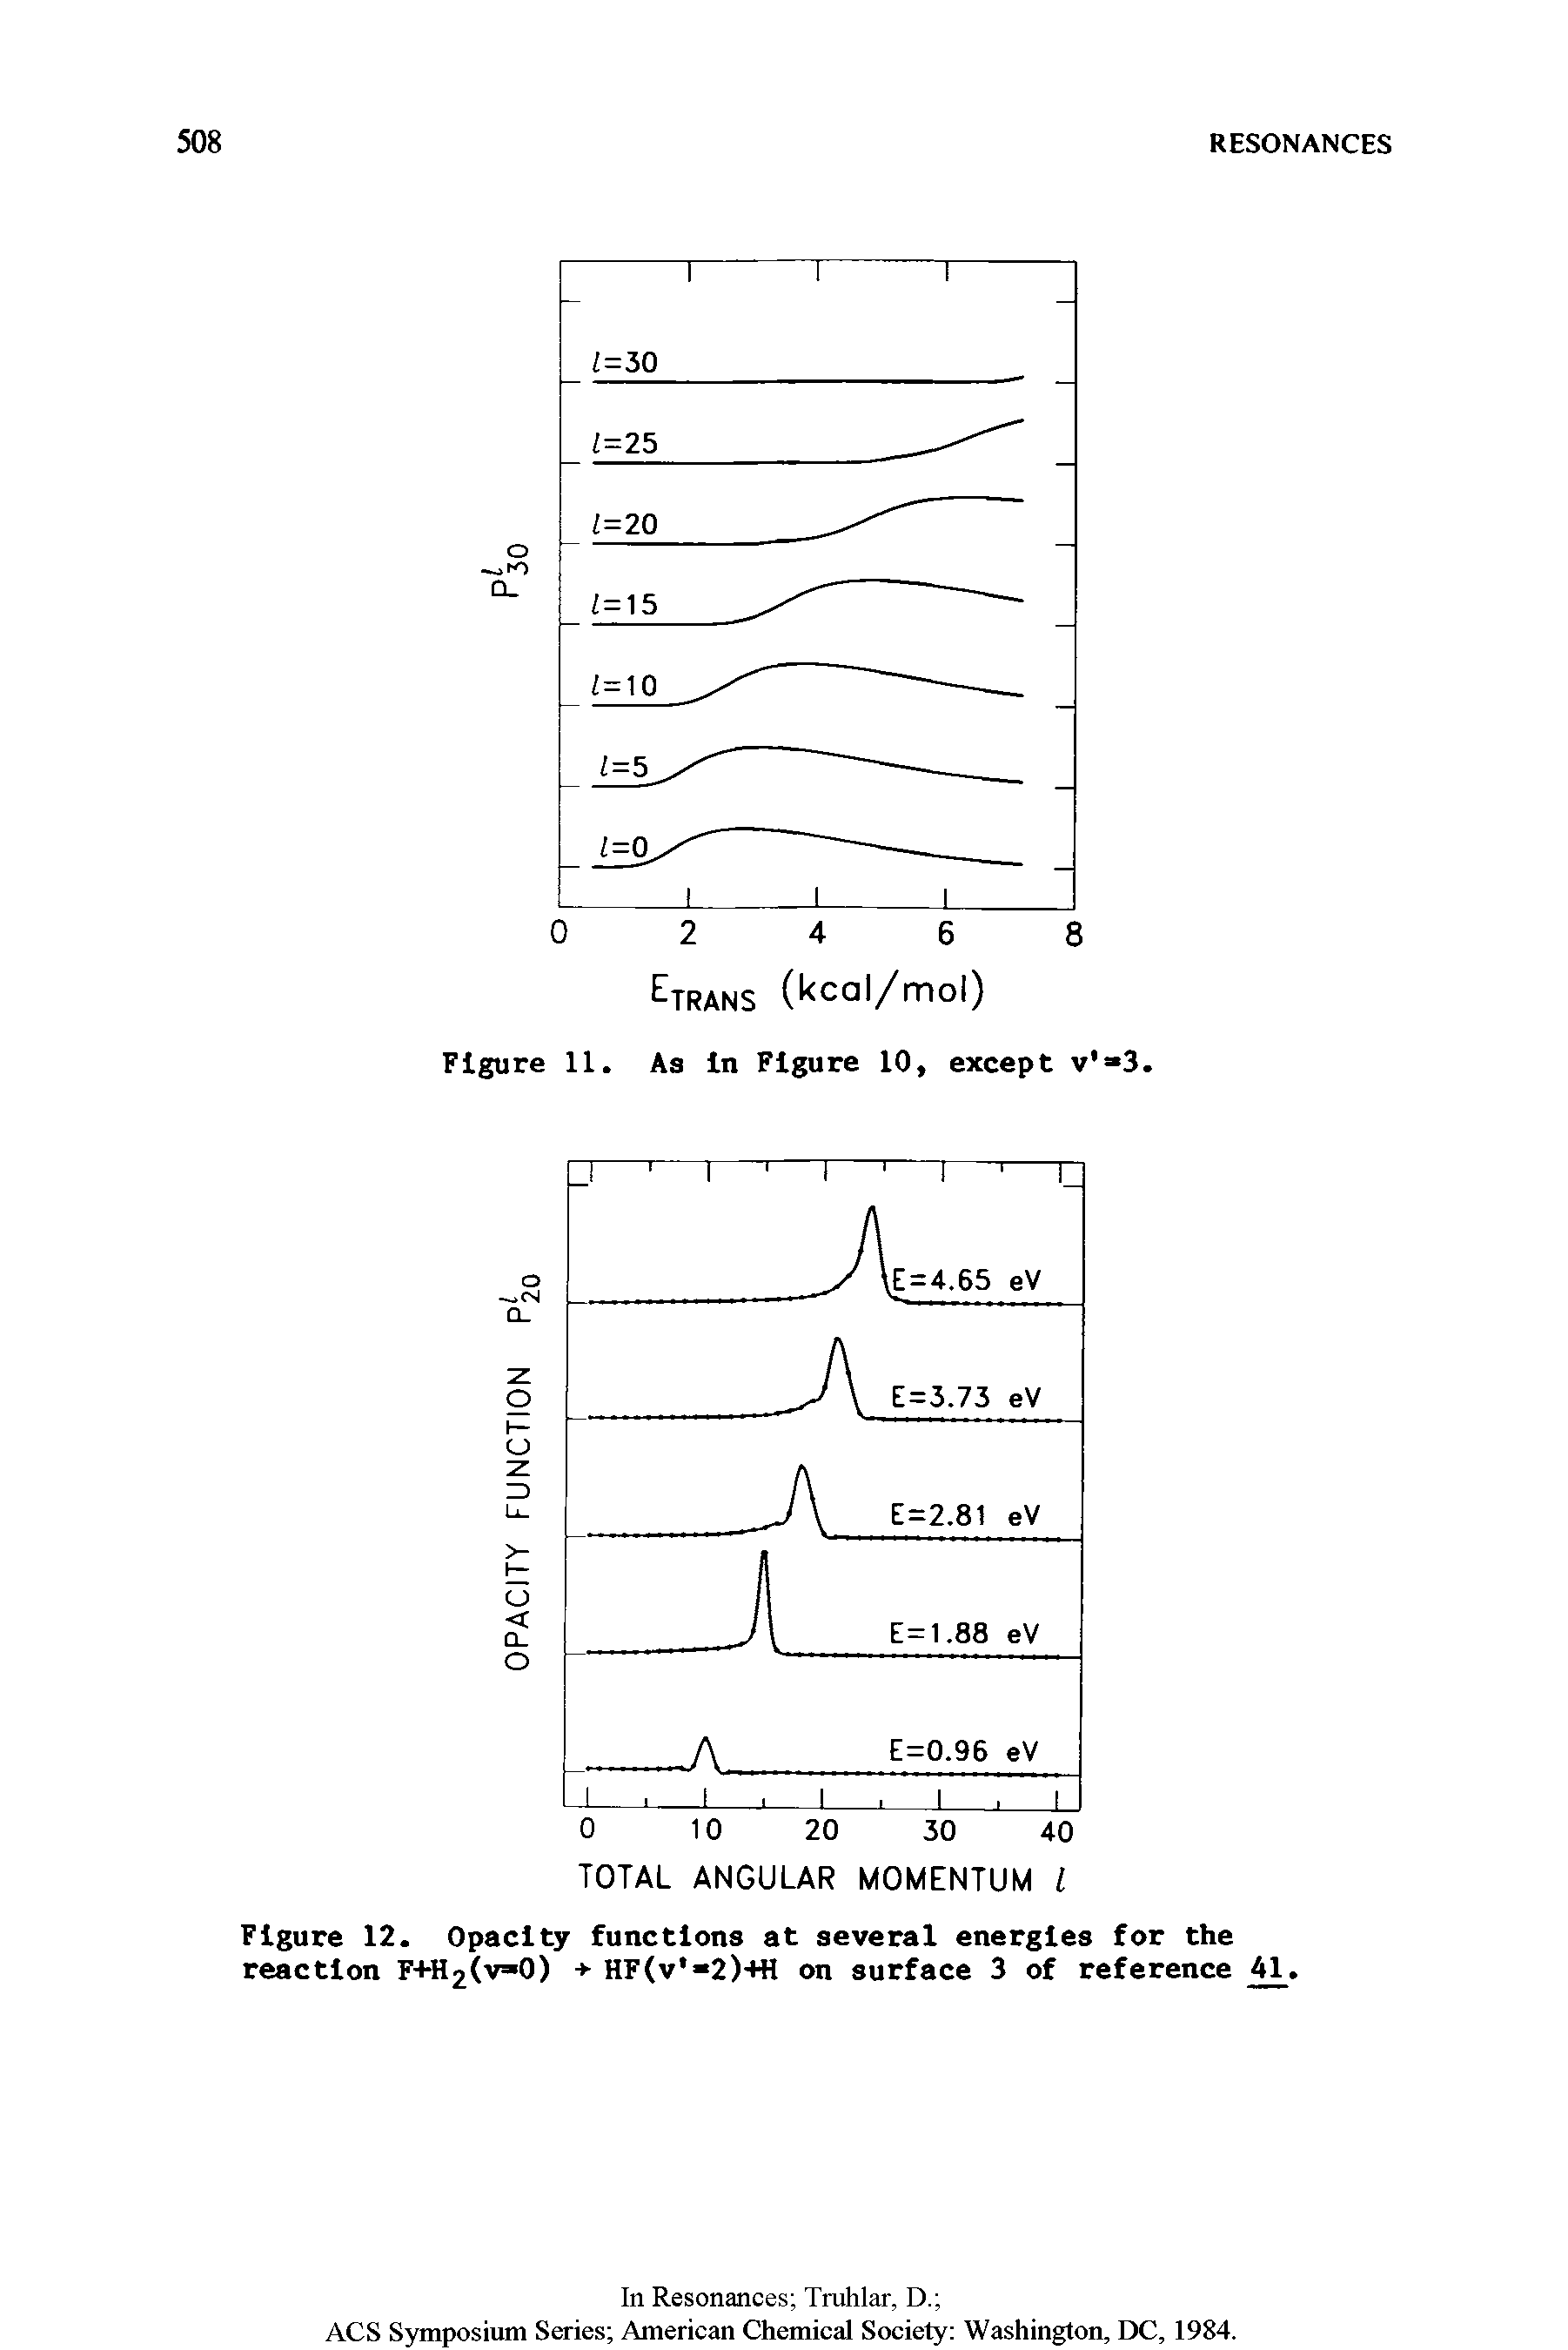 Figure 12. Opacity functions at several energies for the reaction F+H2(v=0) + HF(v 2)+H on surface 3 of reference 41.